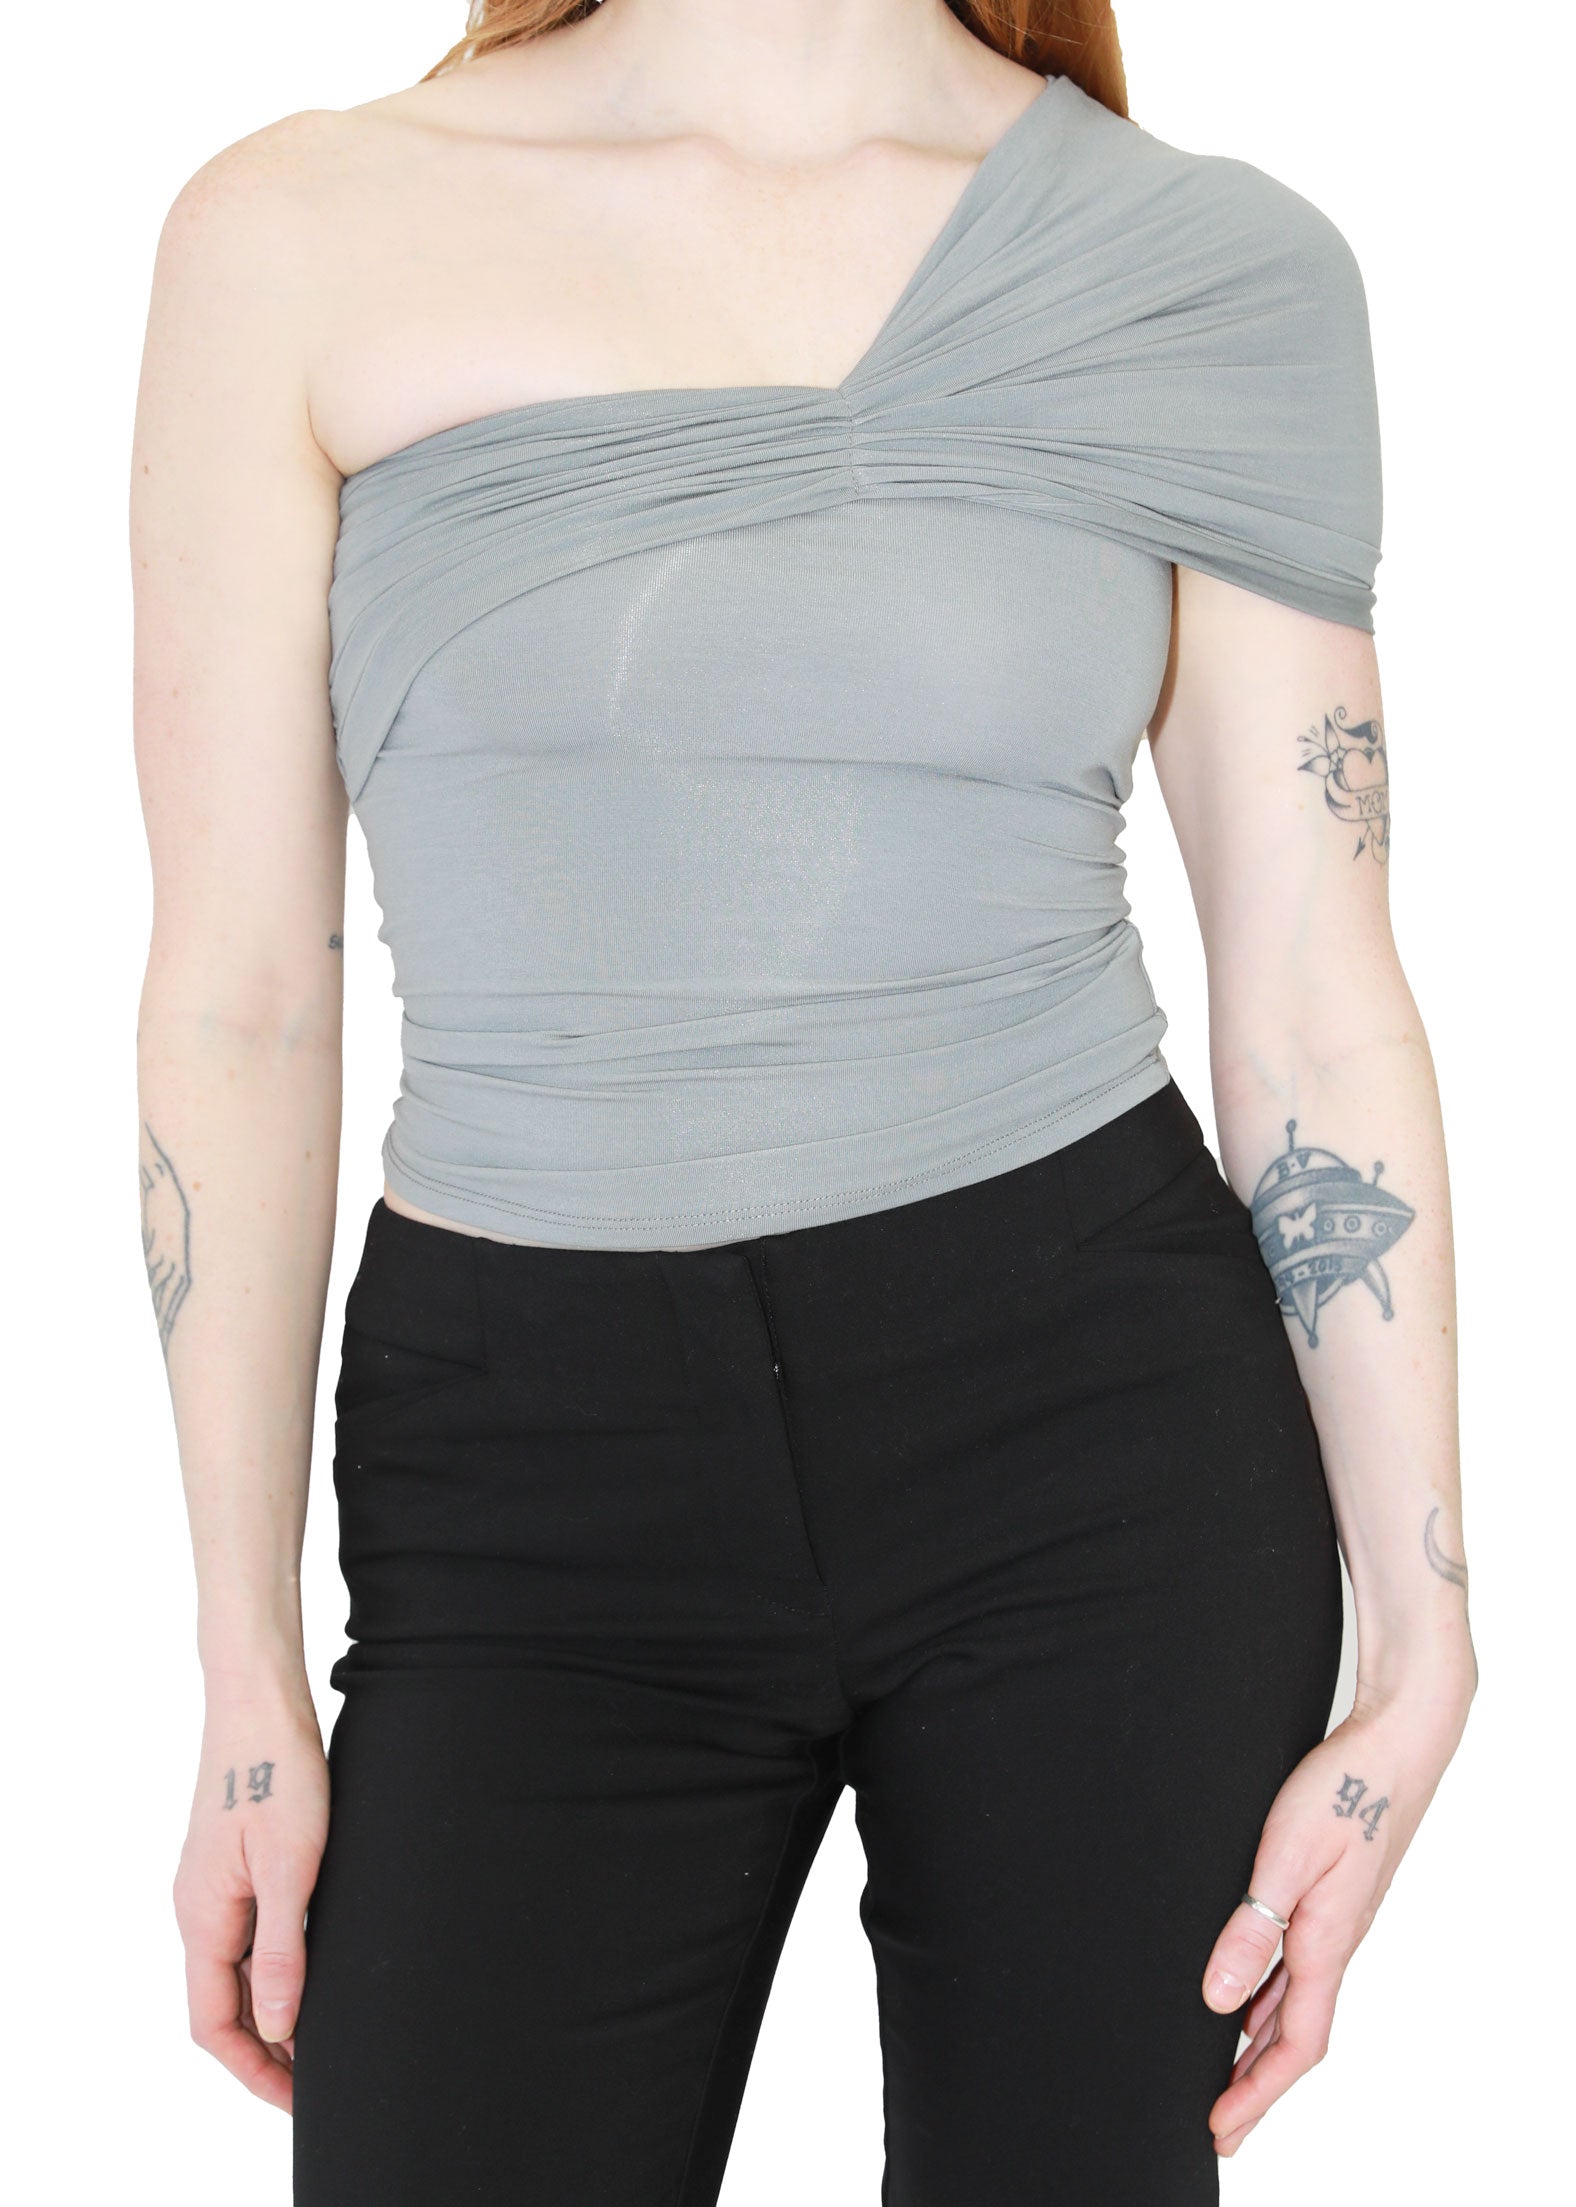 The Line by K Kyo Tube Top Grey